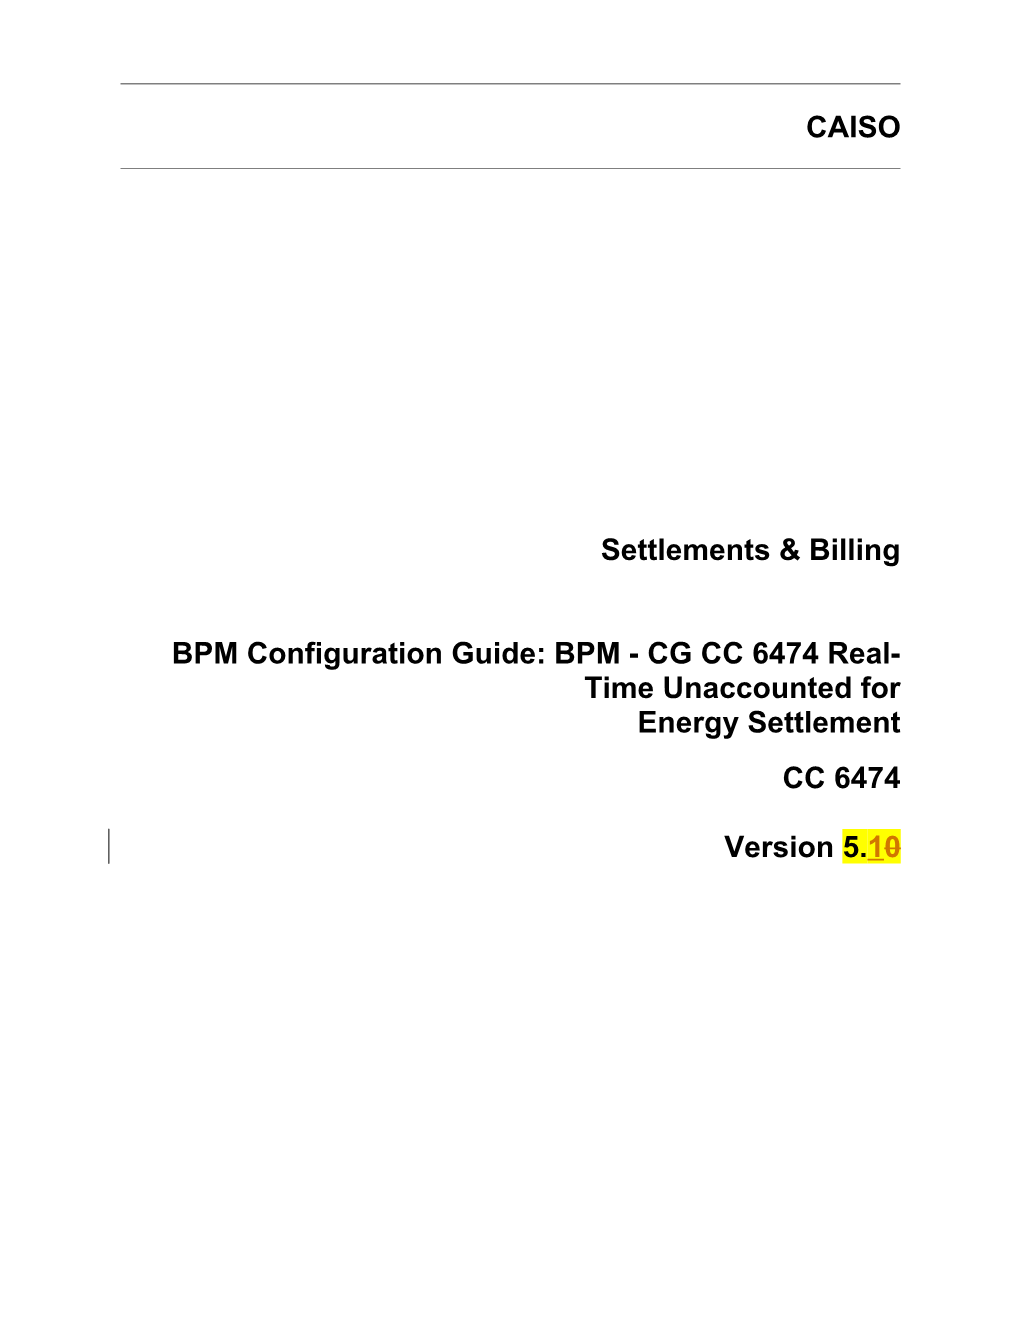 BPM - CG CC 6474 Real-Time Unaccounted for Energy Settlement